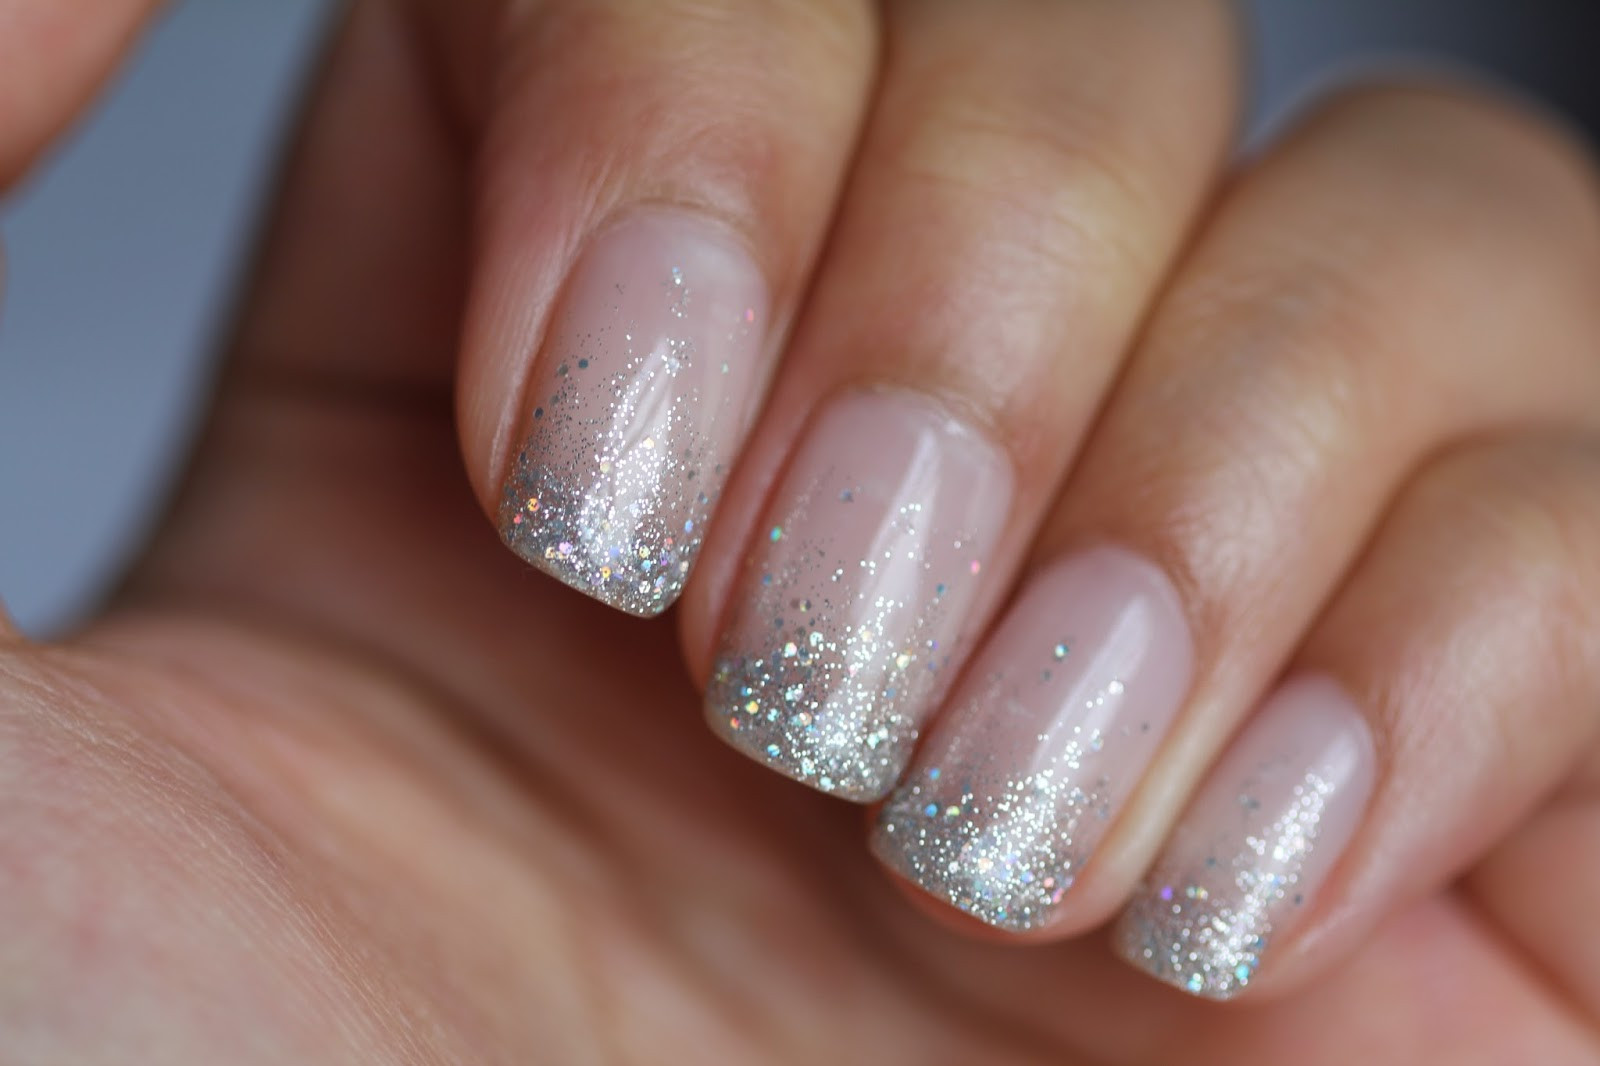 Nails With Glitter
 DSK Steph Cindy s Nails Glitter Waterfall Shellac Nails